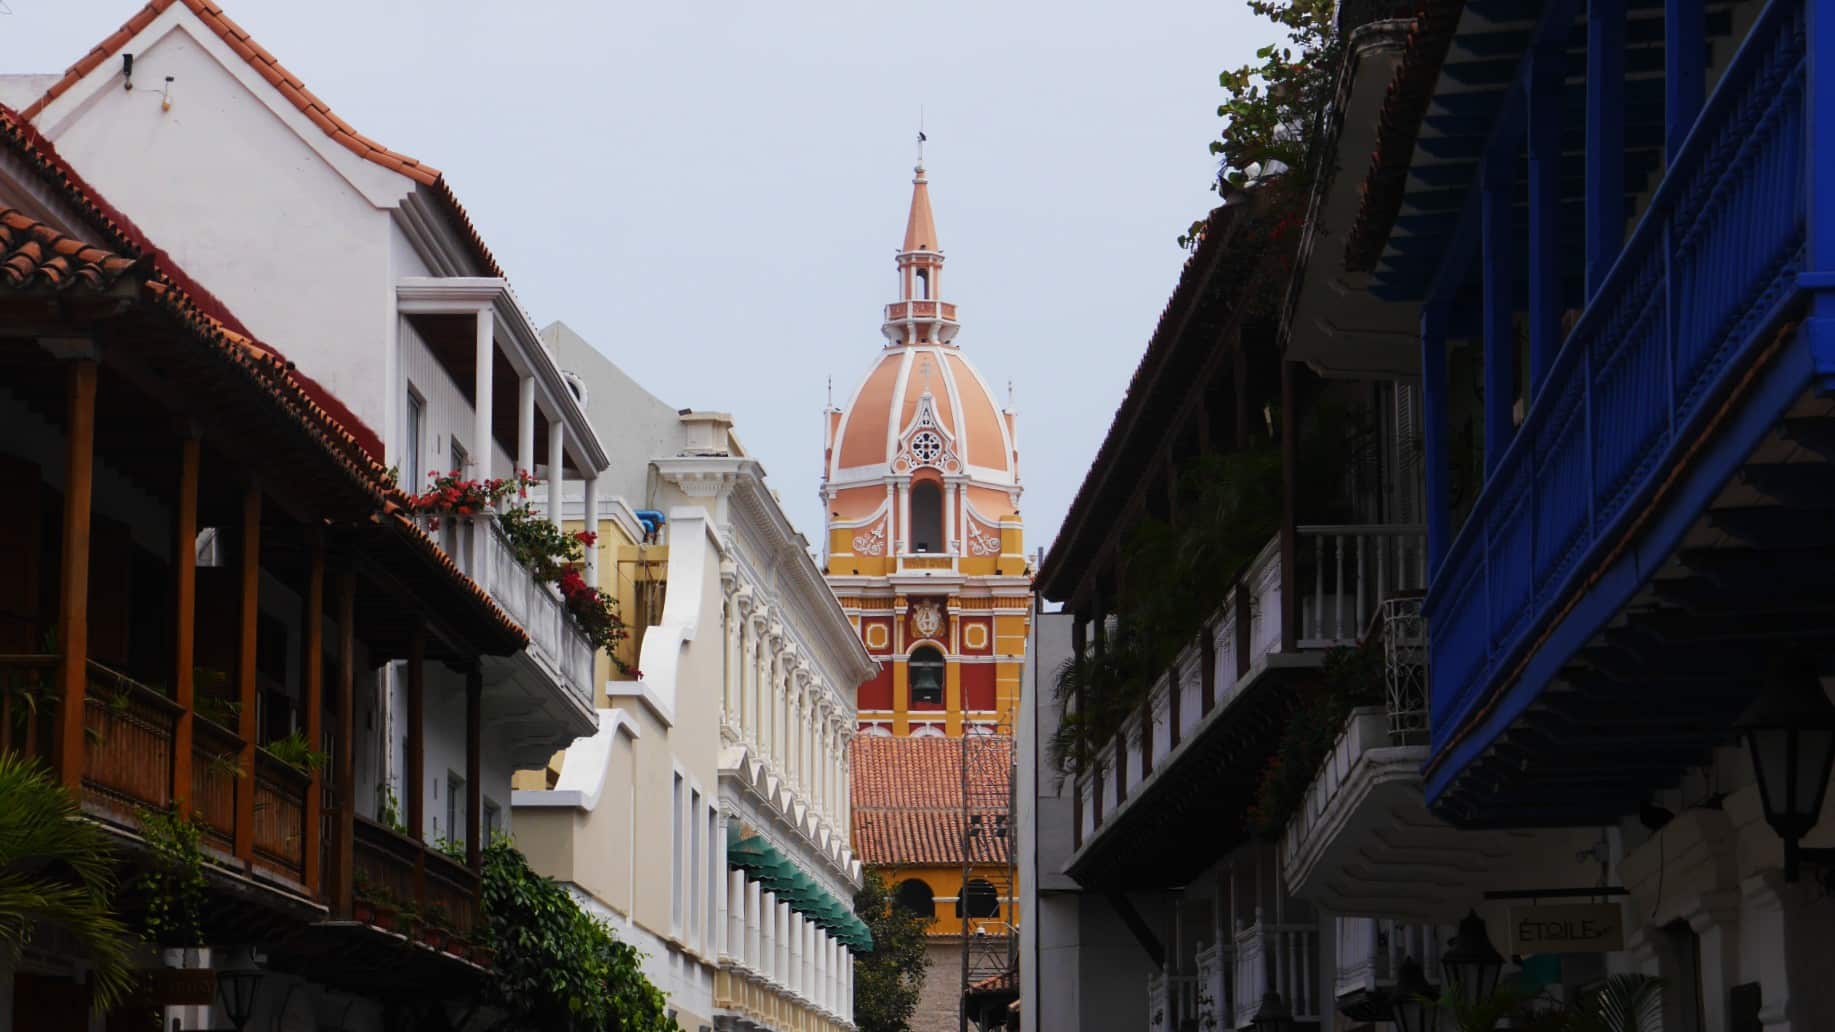 Considered one of the most beautiful historic quarters in the Americas, Cartagena's Centro district is packed with attractions and colonial charm